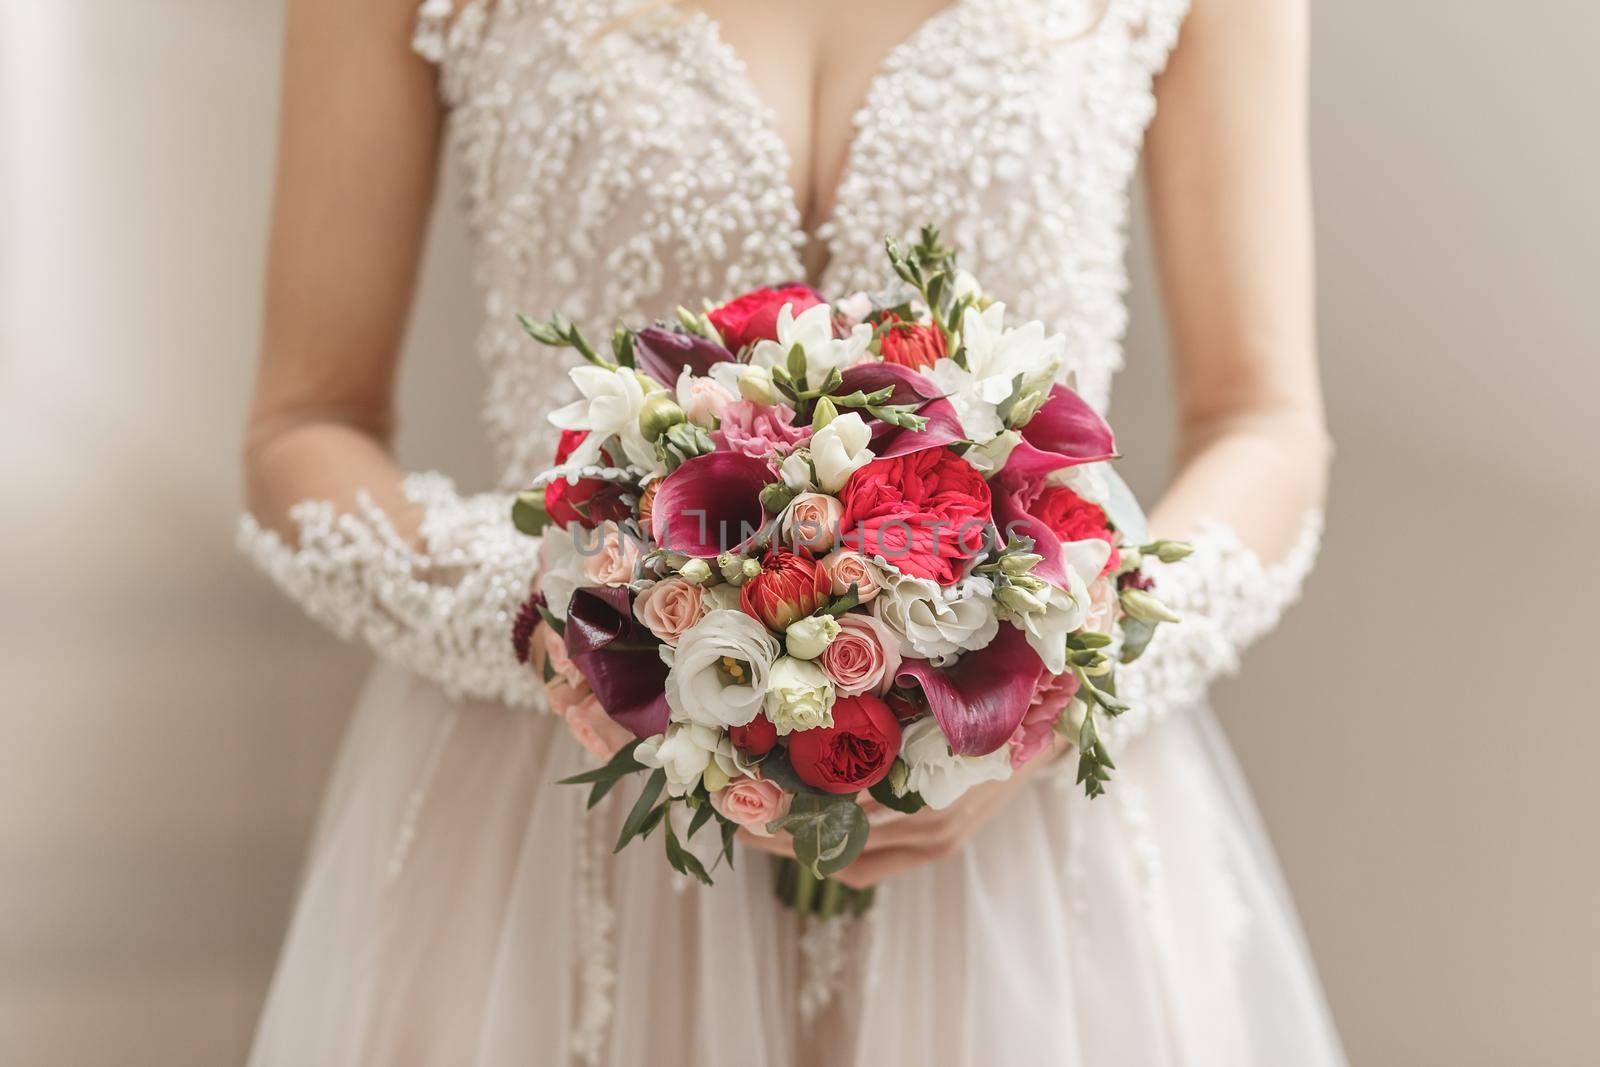 Beautiful wedding bouquet by BY-_-BY